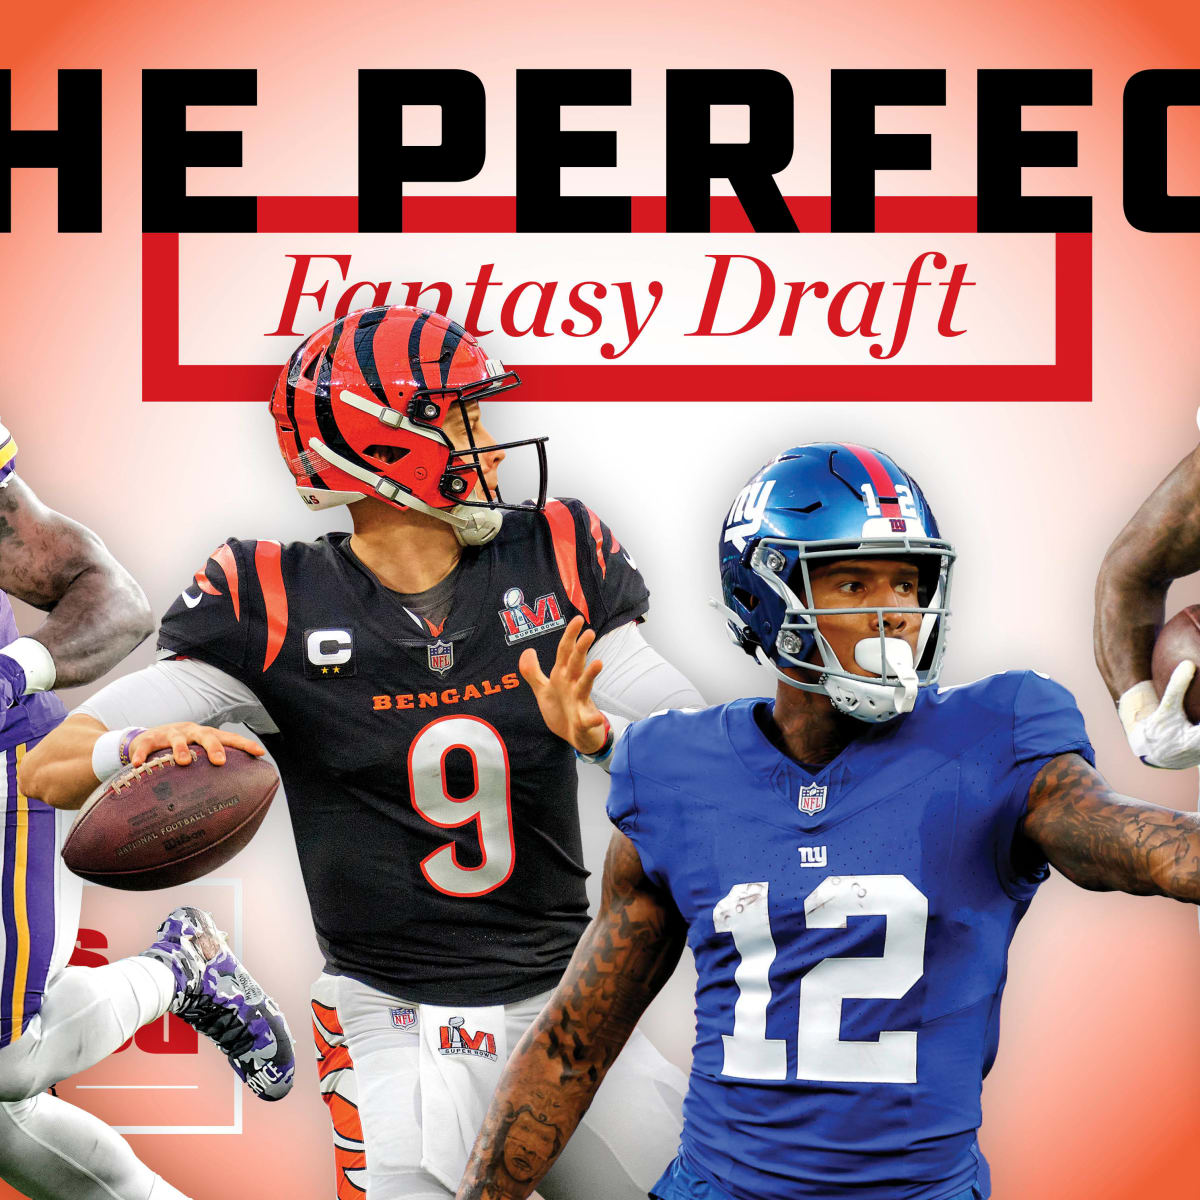 Which of these players would you reach for in your fantasy drafts